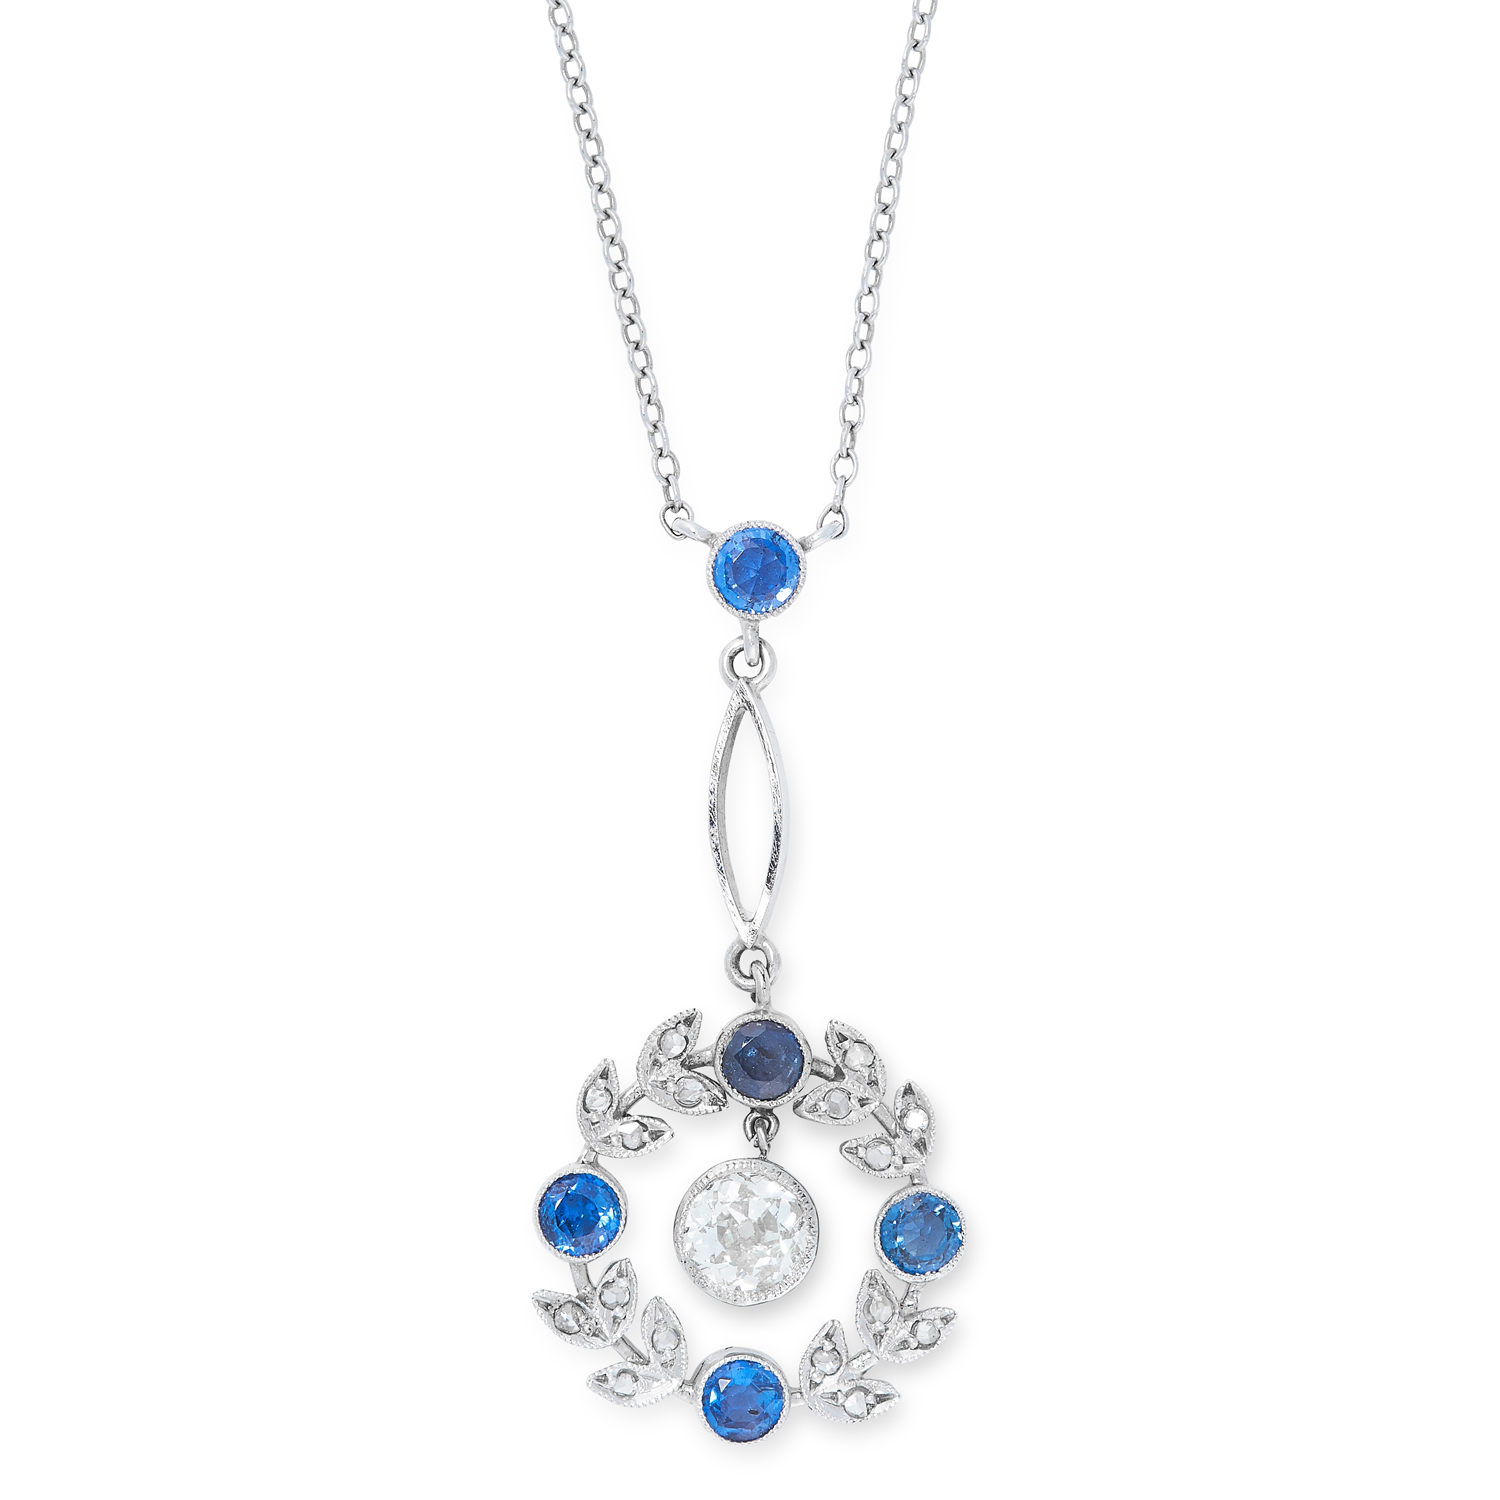 A SAPPHIRE AND DIAMOND PENDANT NECKLACE comprising of a foliate border set with rose cut diamonds